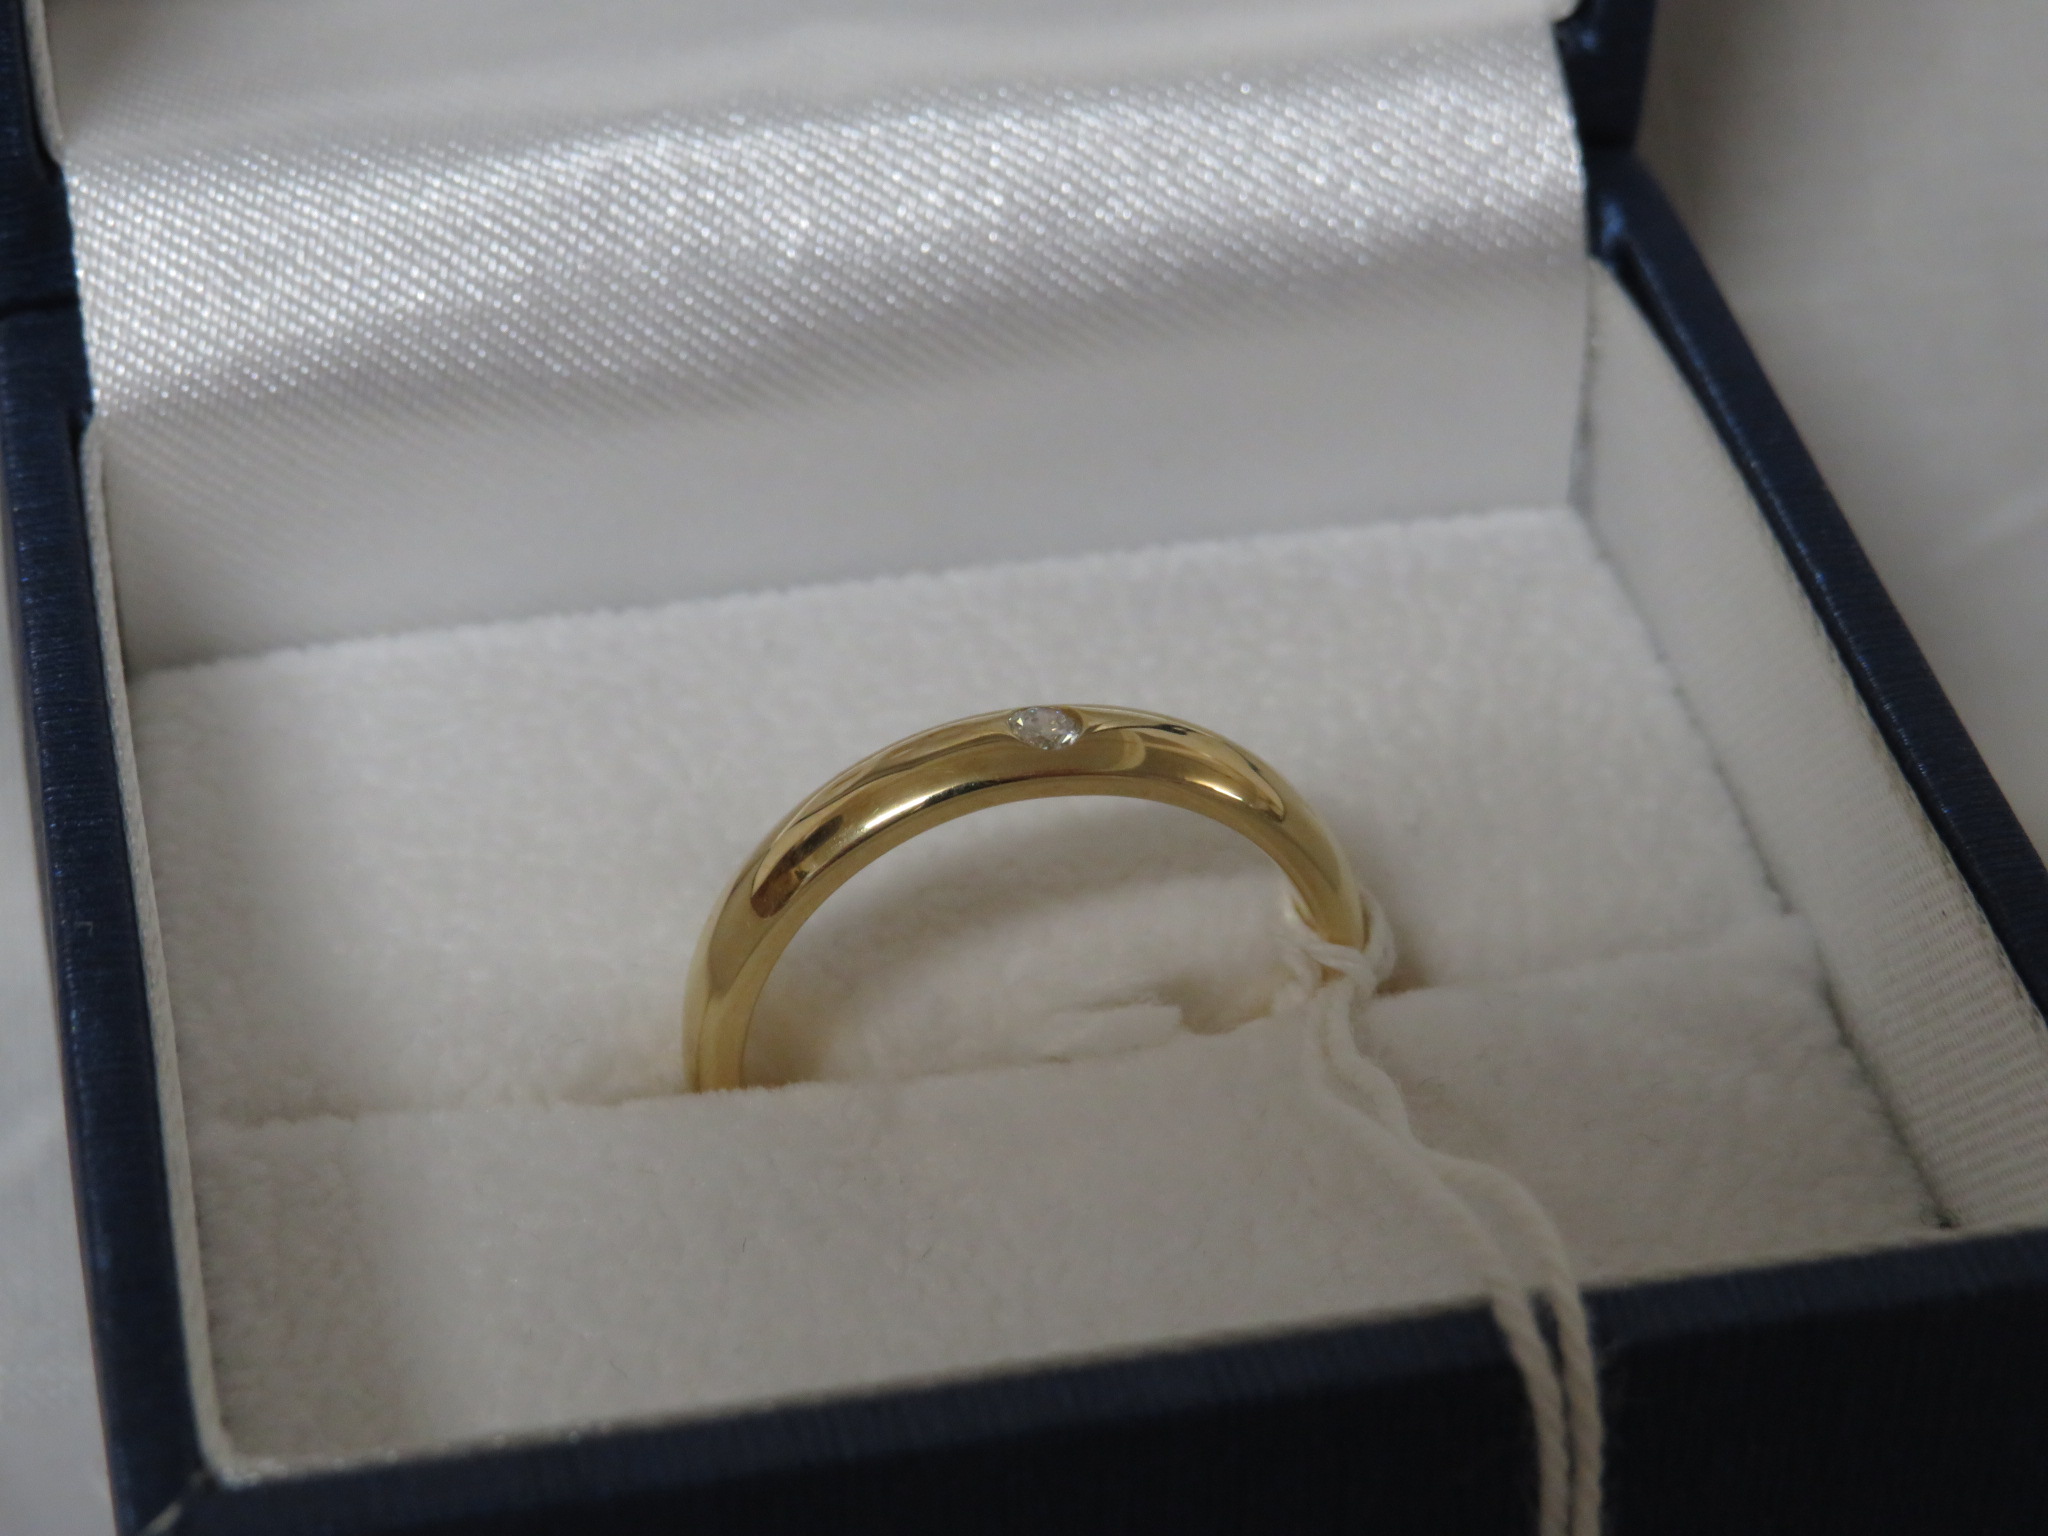 18 CARAT GOLD WEDDING BAND SET WITH SMALL WHITE STONE, 7.3G, IN PRESENTATION BOX. - Image 2 of 3